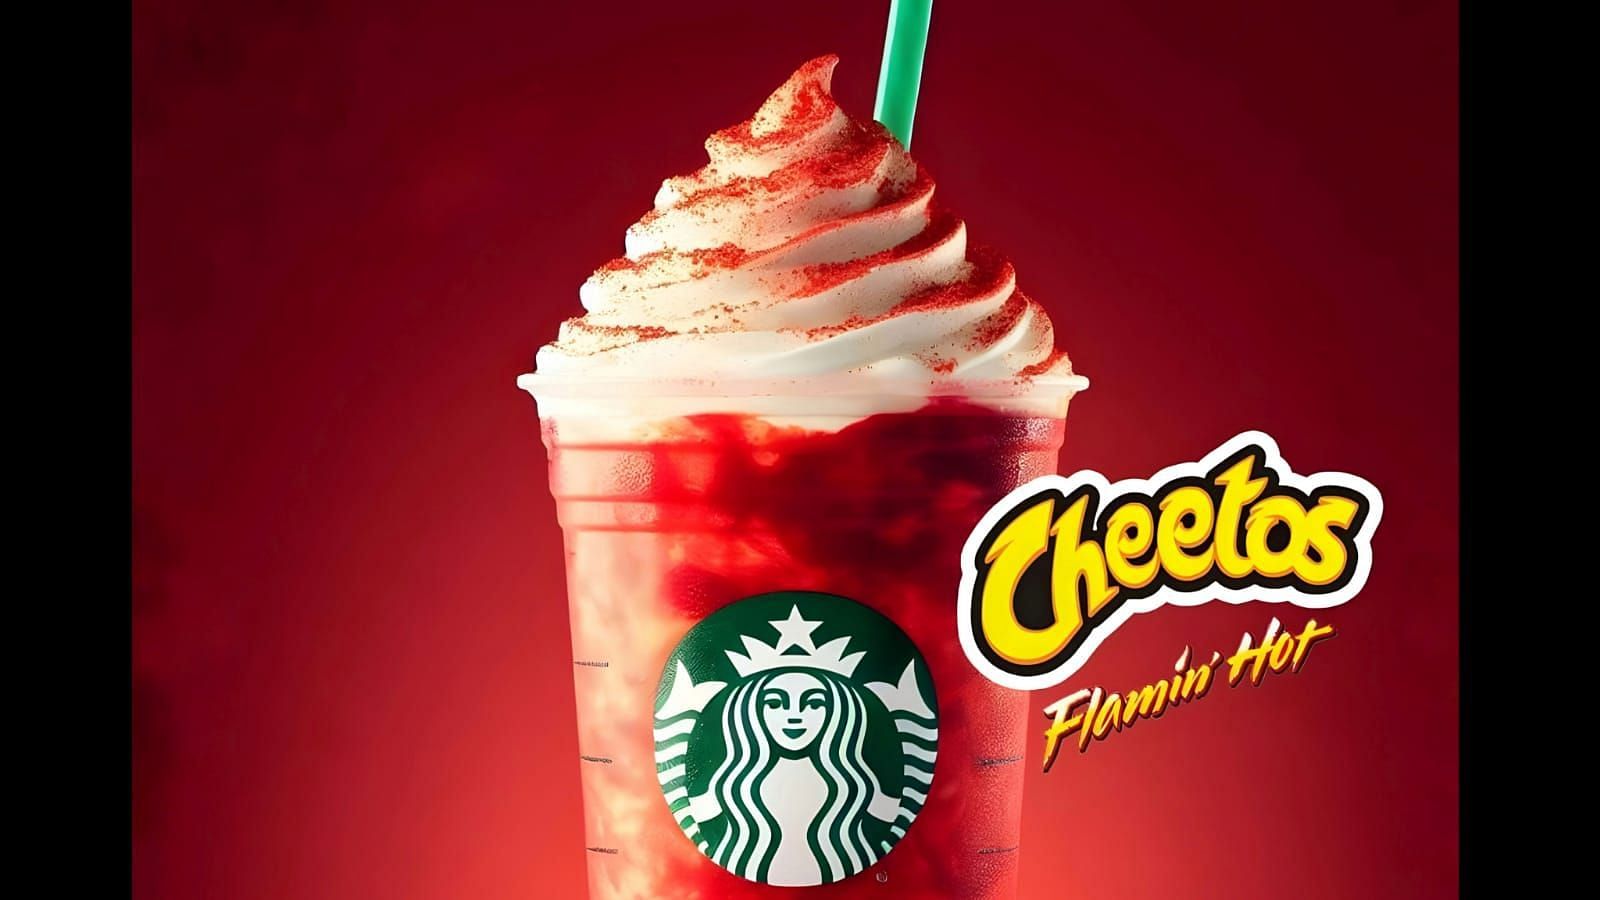 Is the Starbucks Cheetos Flamin